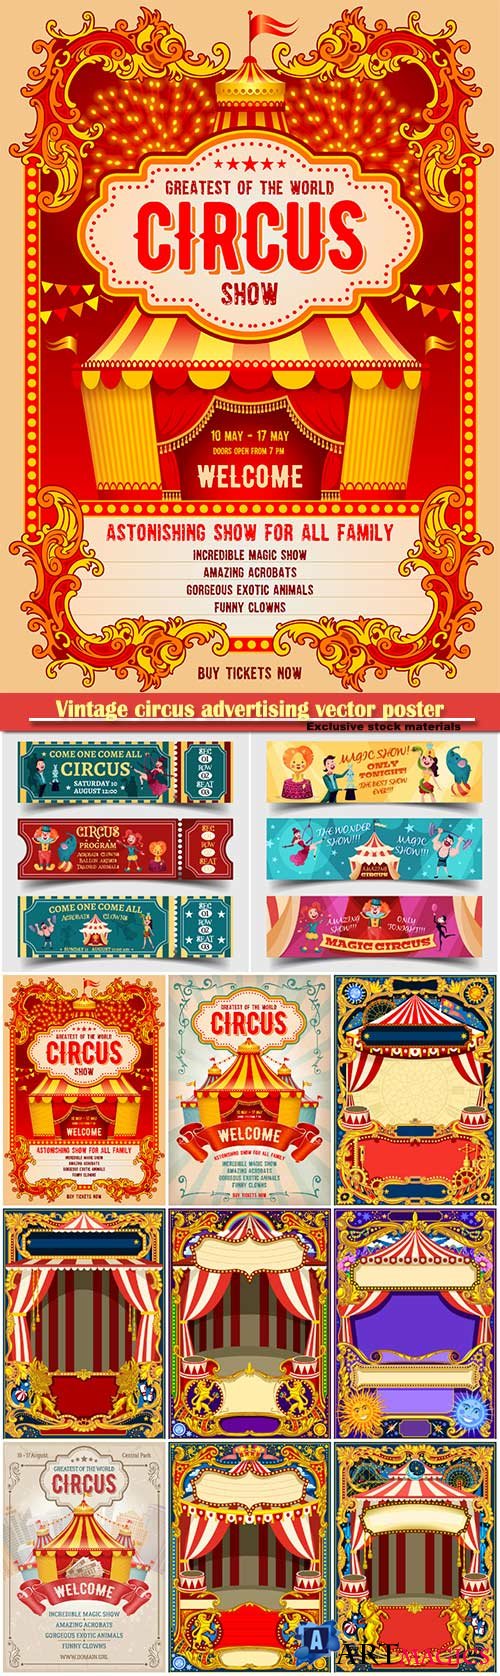 Vintage circus advertising vector poster or flyer with big circus marquee